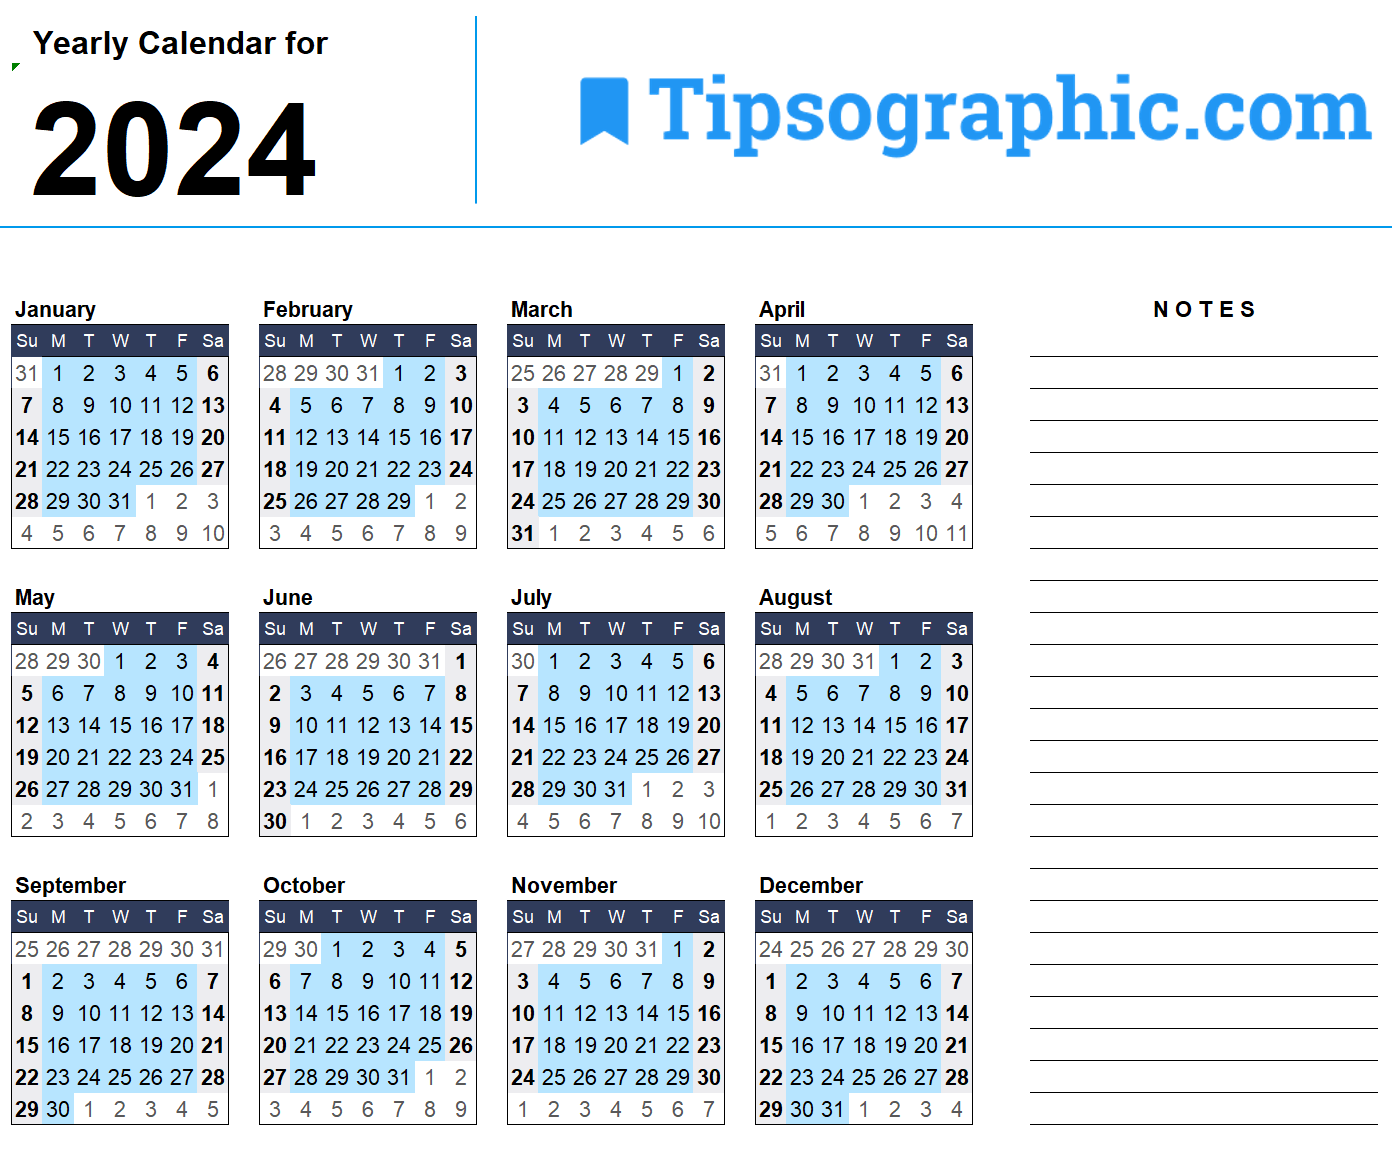 2024-calendar-templates-and-images-2024-year-calendar-yearly-printable-2024-printable-yearly